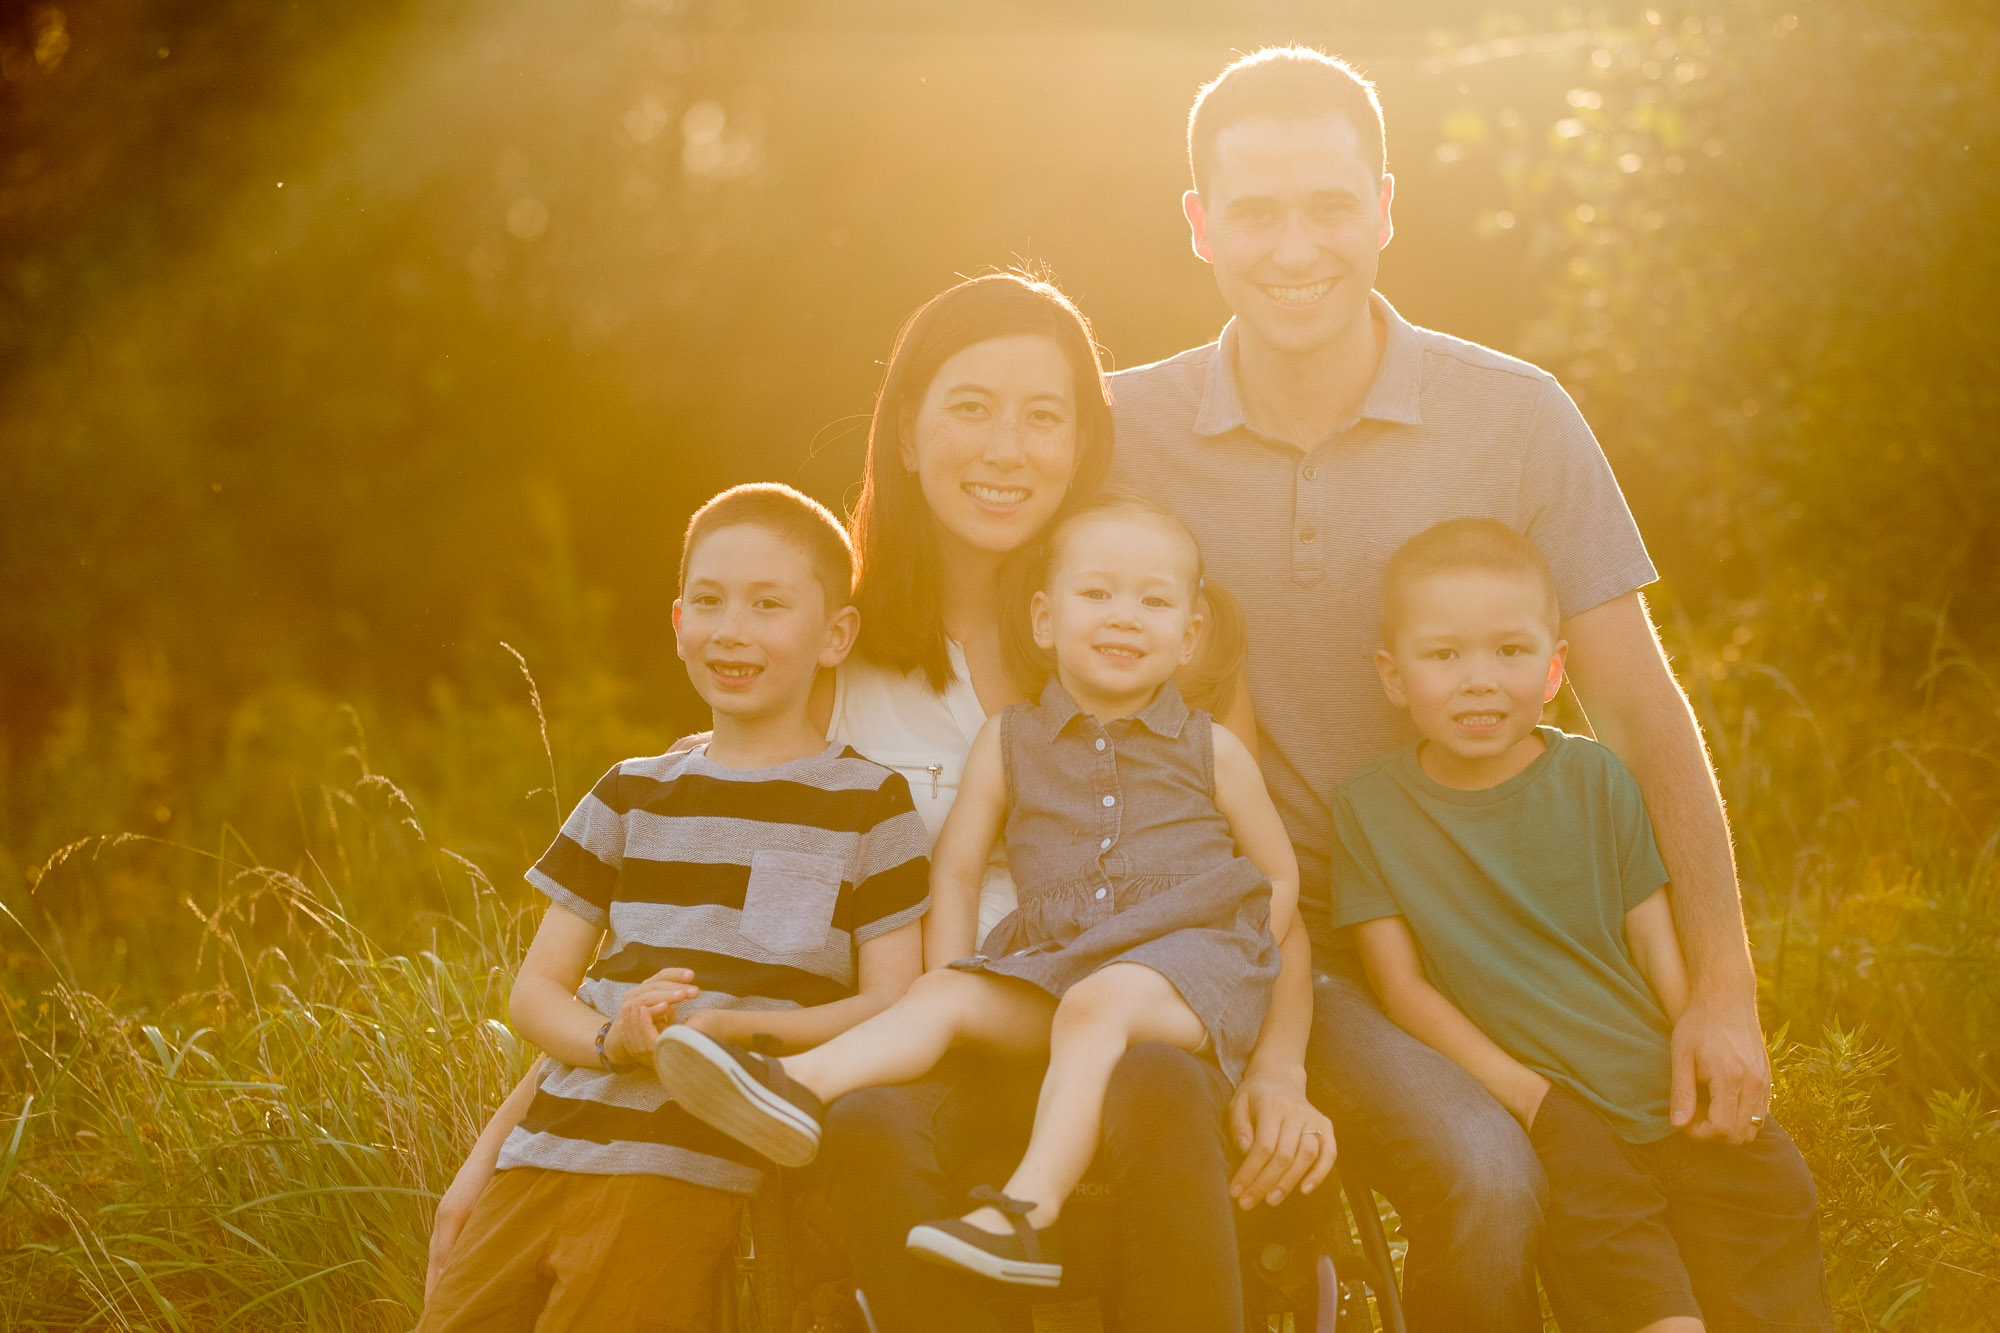  Photographs from a family photography session in Waterloo, Ontario by Scott Williams. 